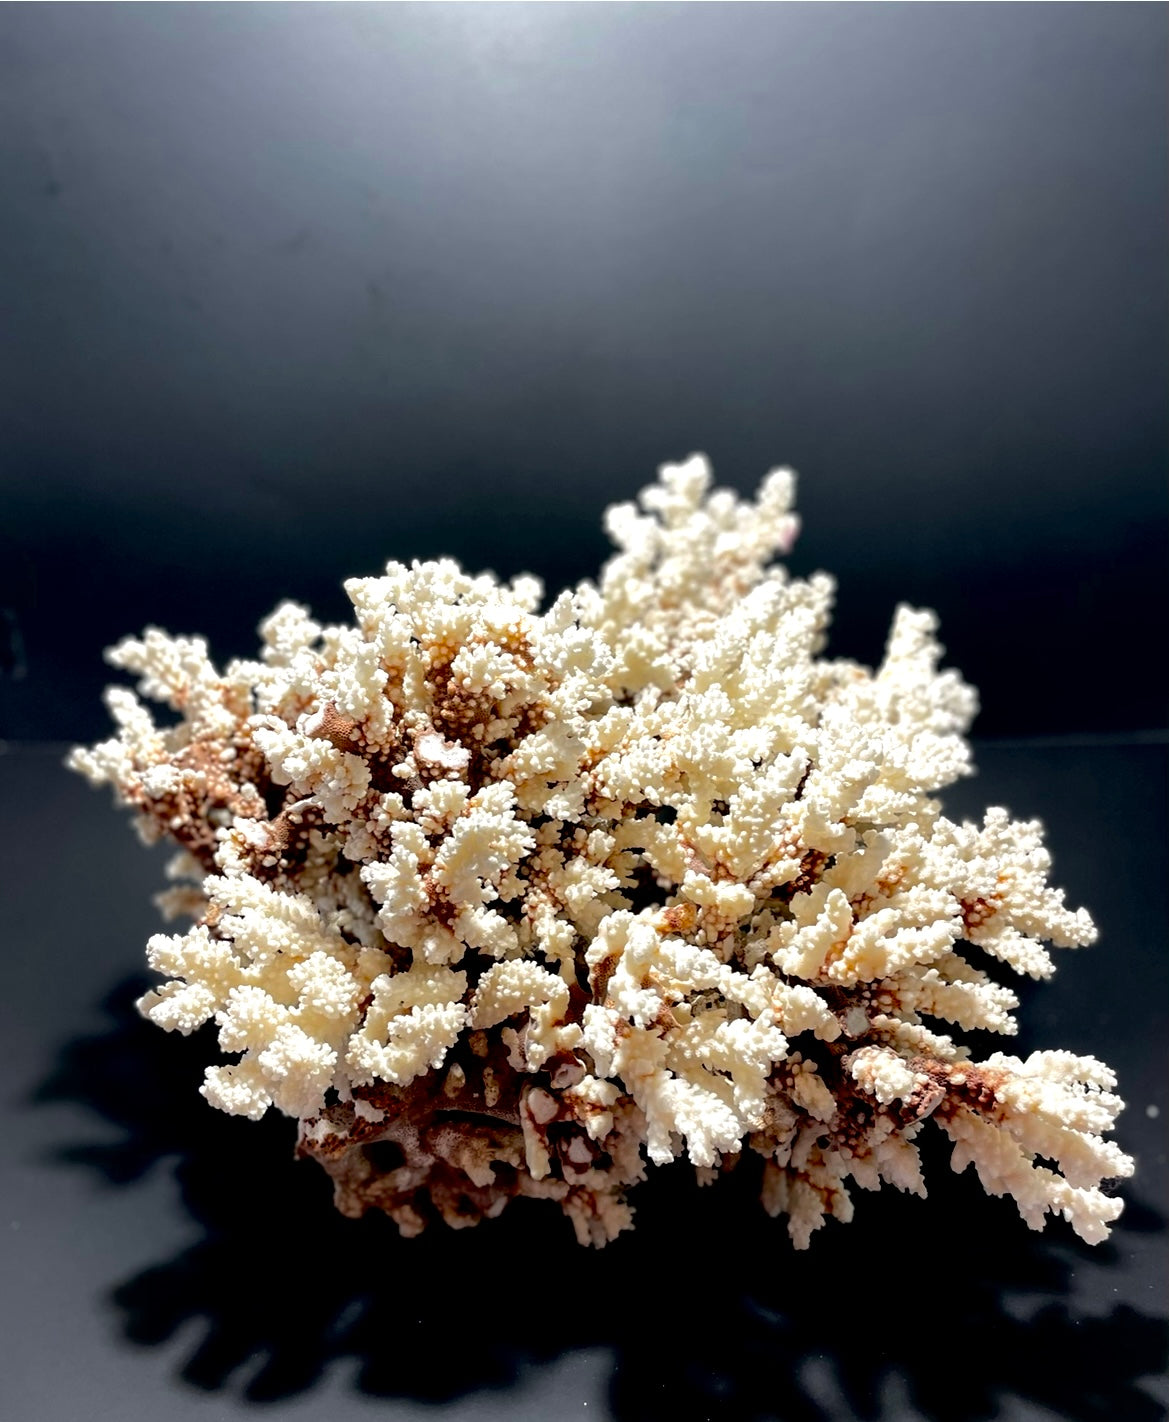 Brownstem Coral 16”x16”x15” (20 lbs) - Treasures from Beneath